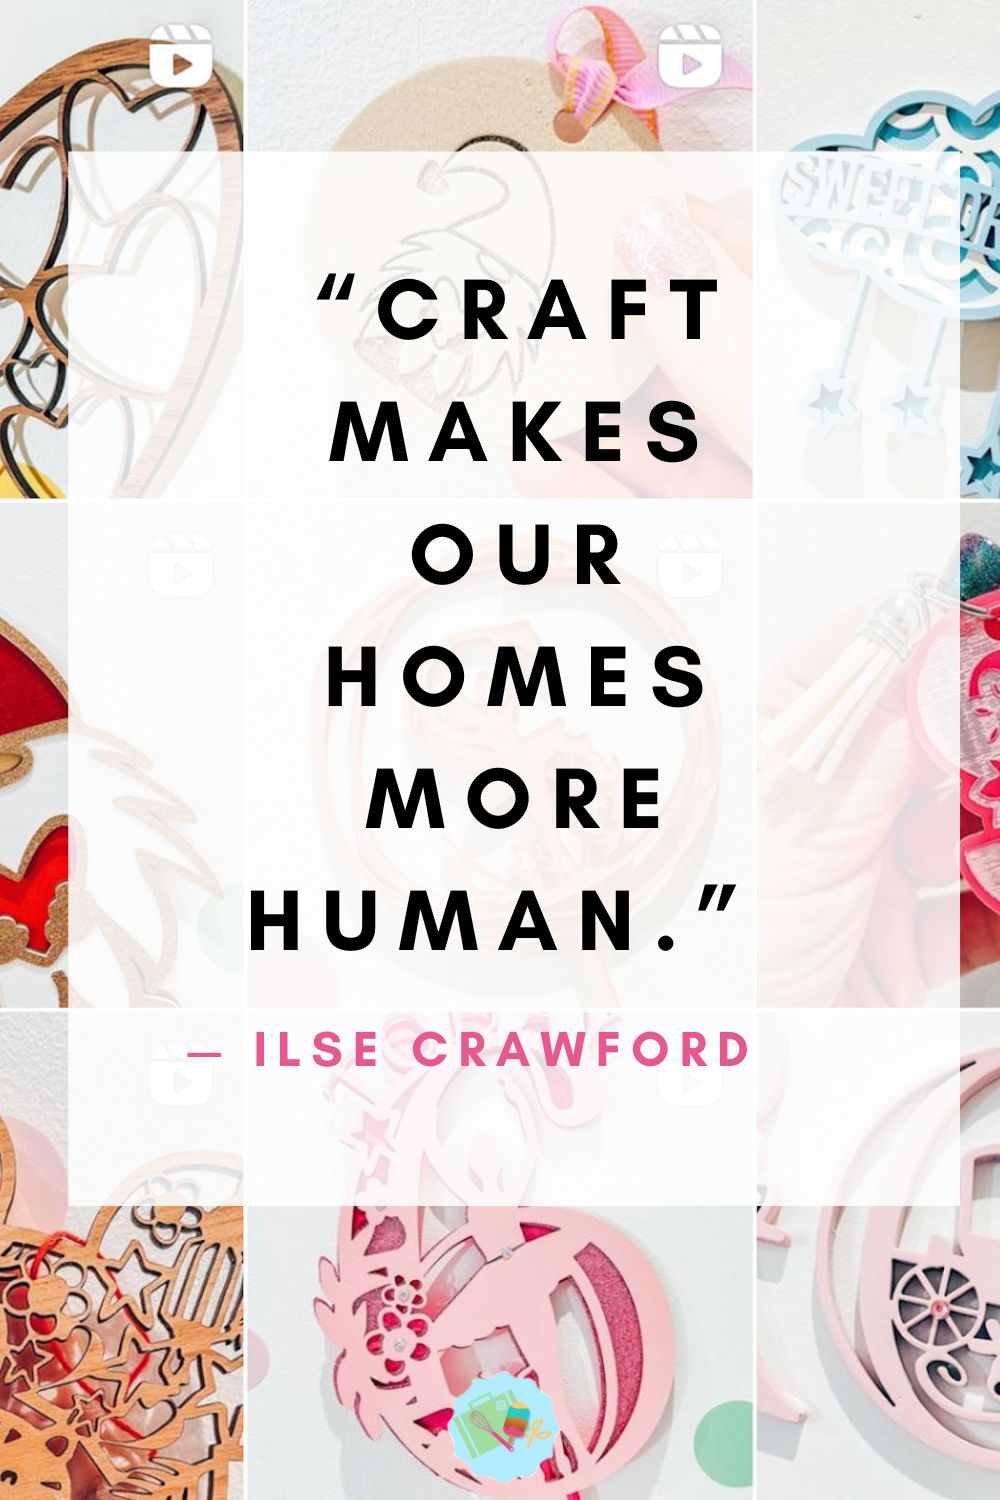 “Craft makes our homes more human.” Best Crafting Quotes